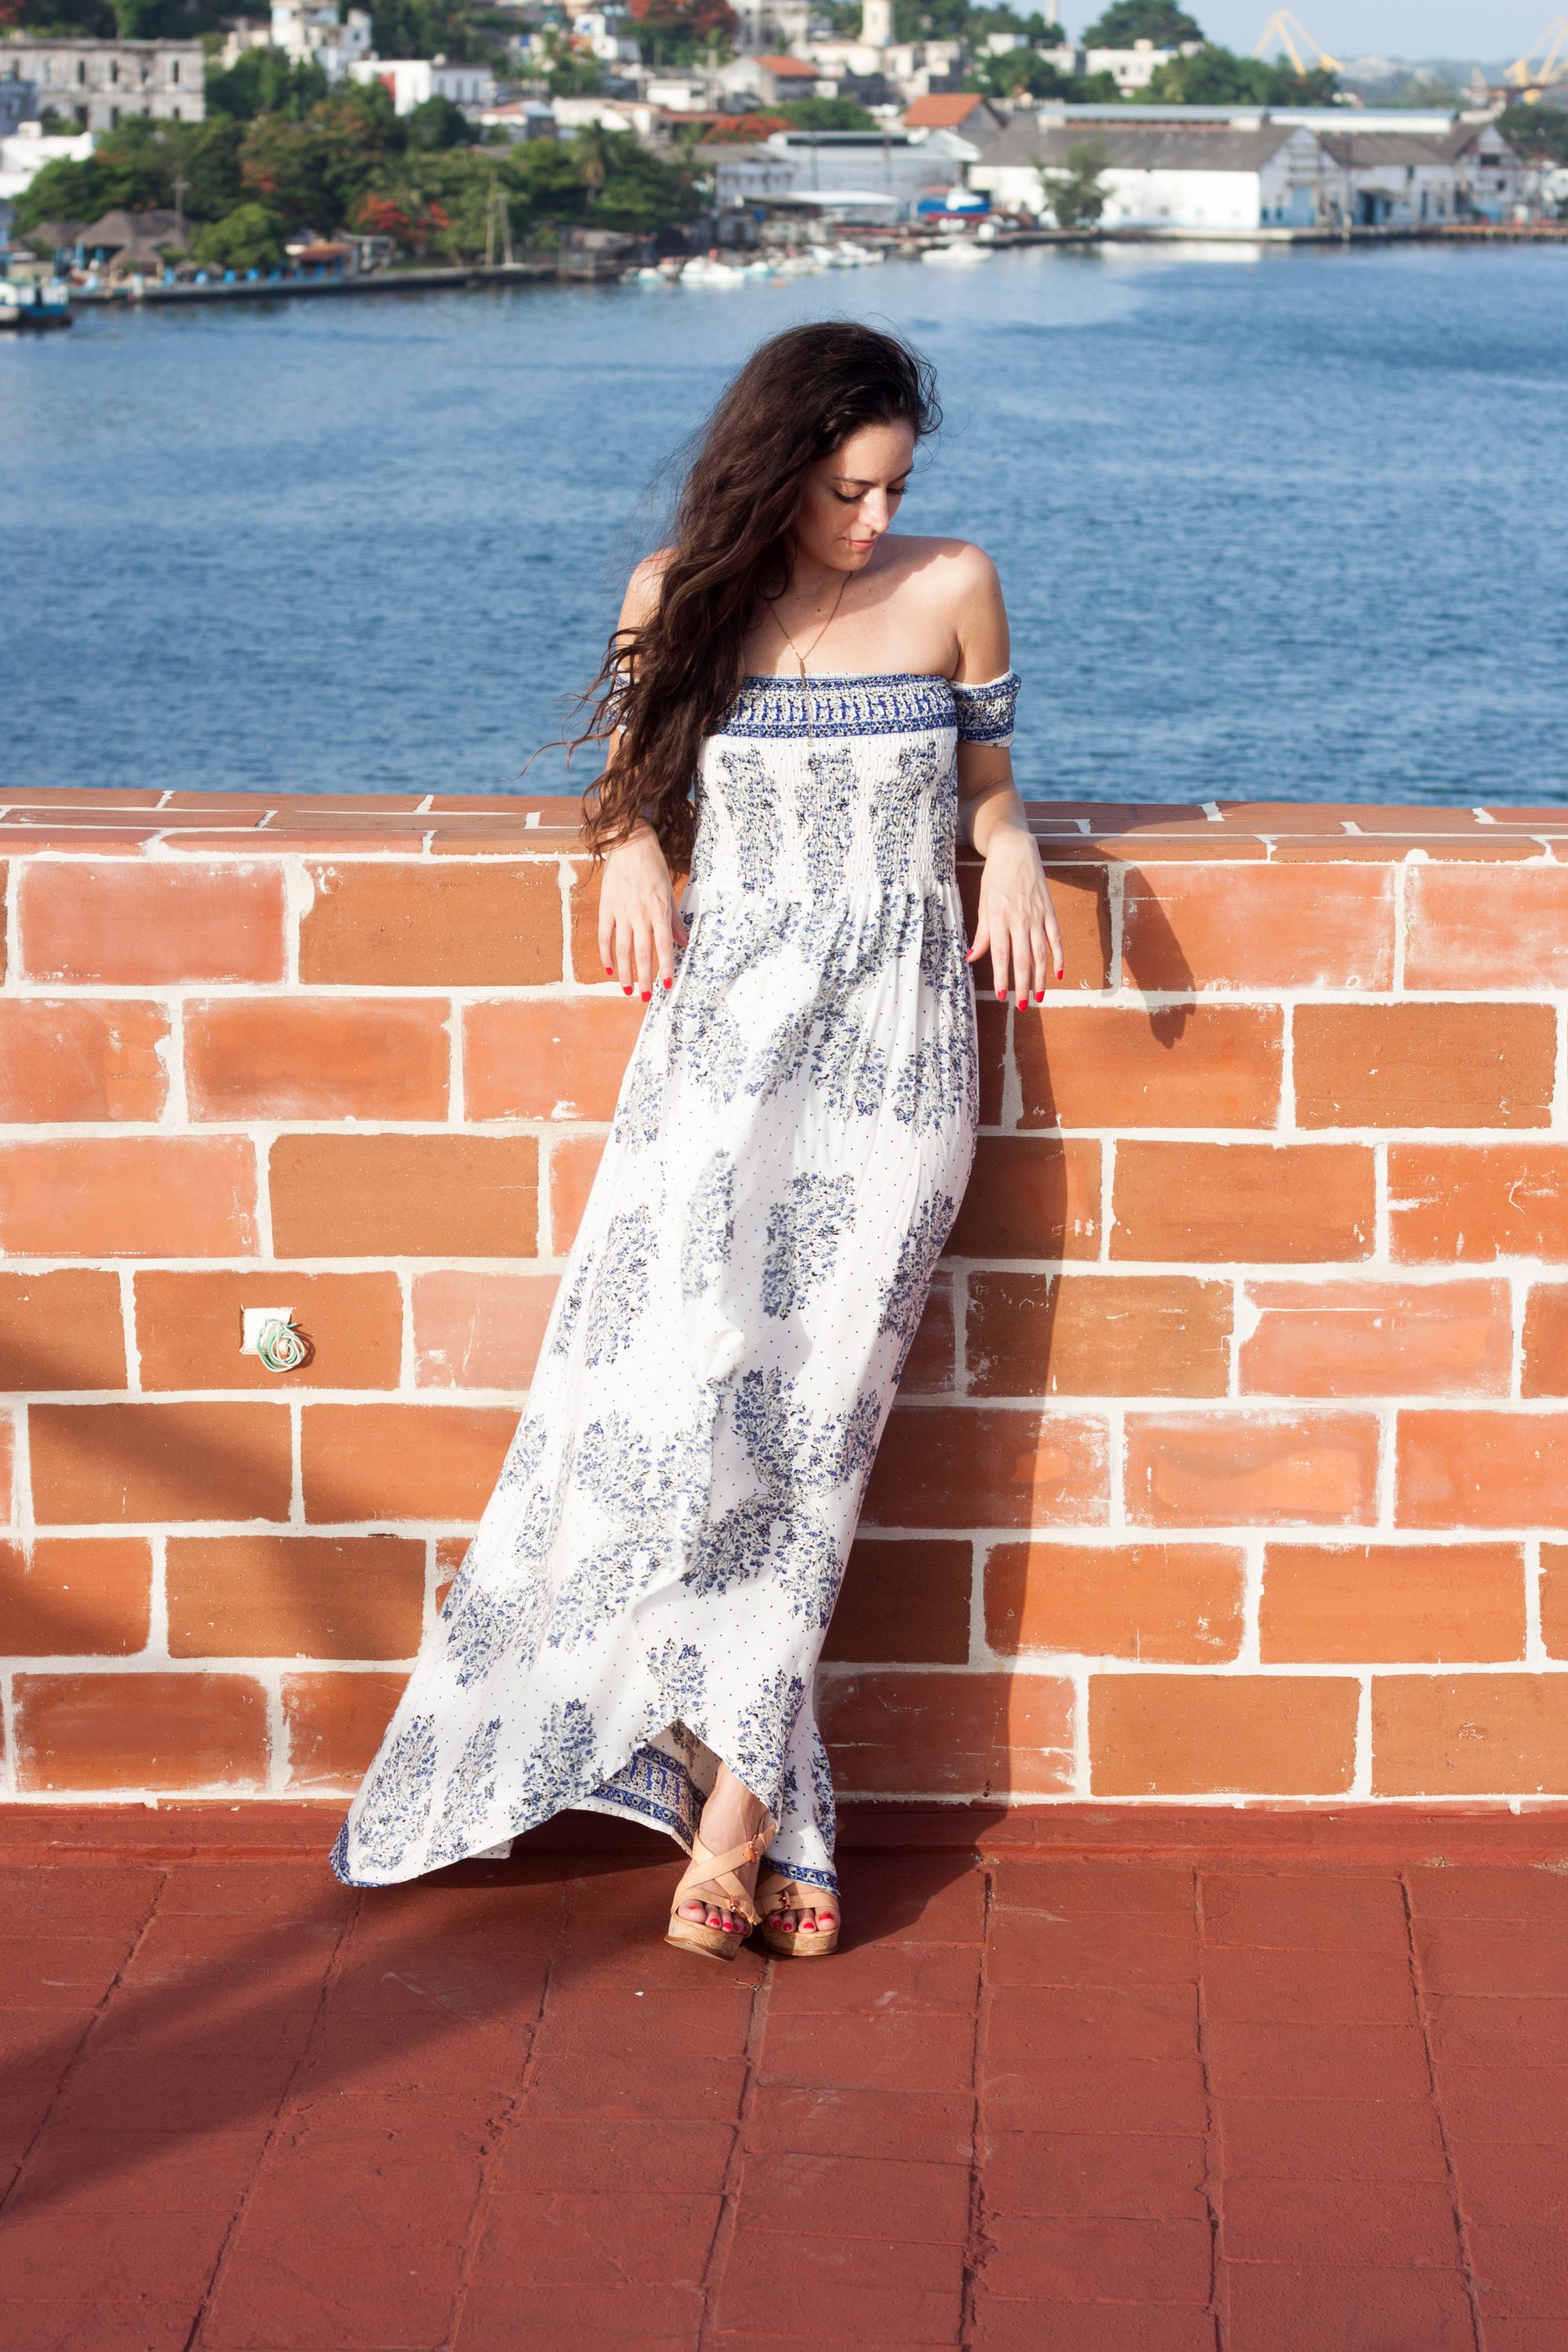 where to stay in havana, where to stay in cuba, airbnb in cuba, airbnb in havana, cuba, havana, blue and white maxi dress, american threads Reverse Allegra Off Shoulder Maxi Dress, cocktail hour, rooftop terrace in havana cuba,